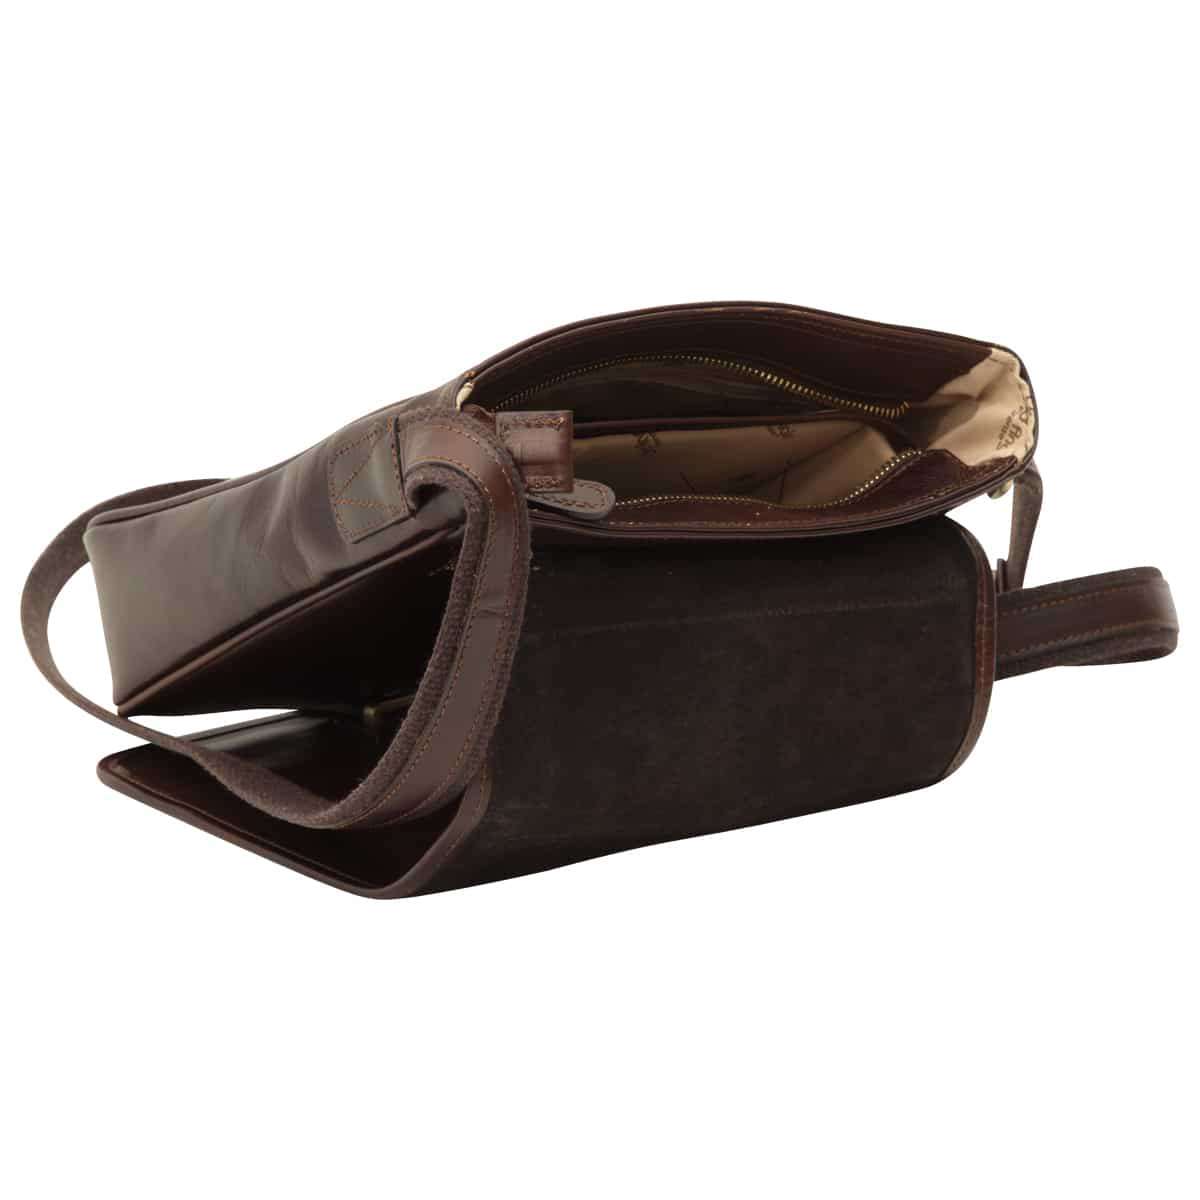 Small leather bag with magnetic closure - Dark Brown | 406689TM UK | Old Angler Firenze